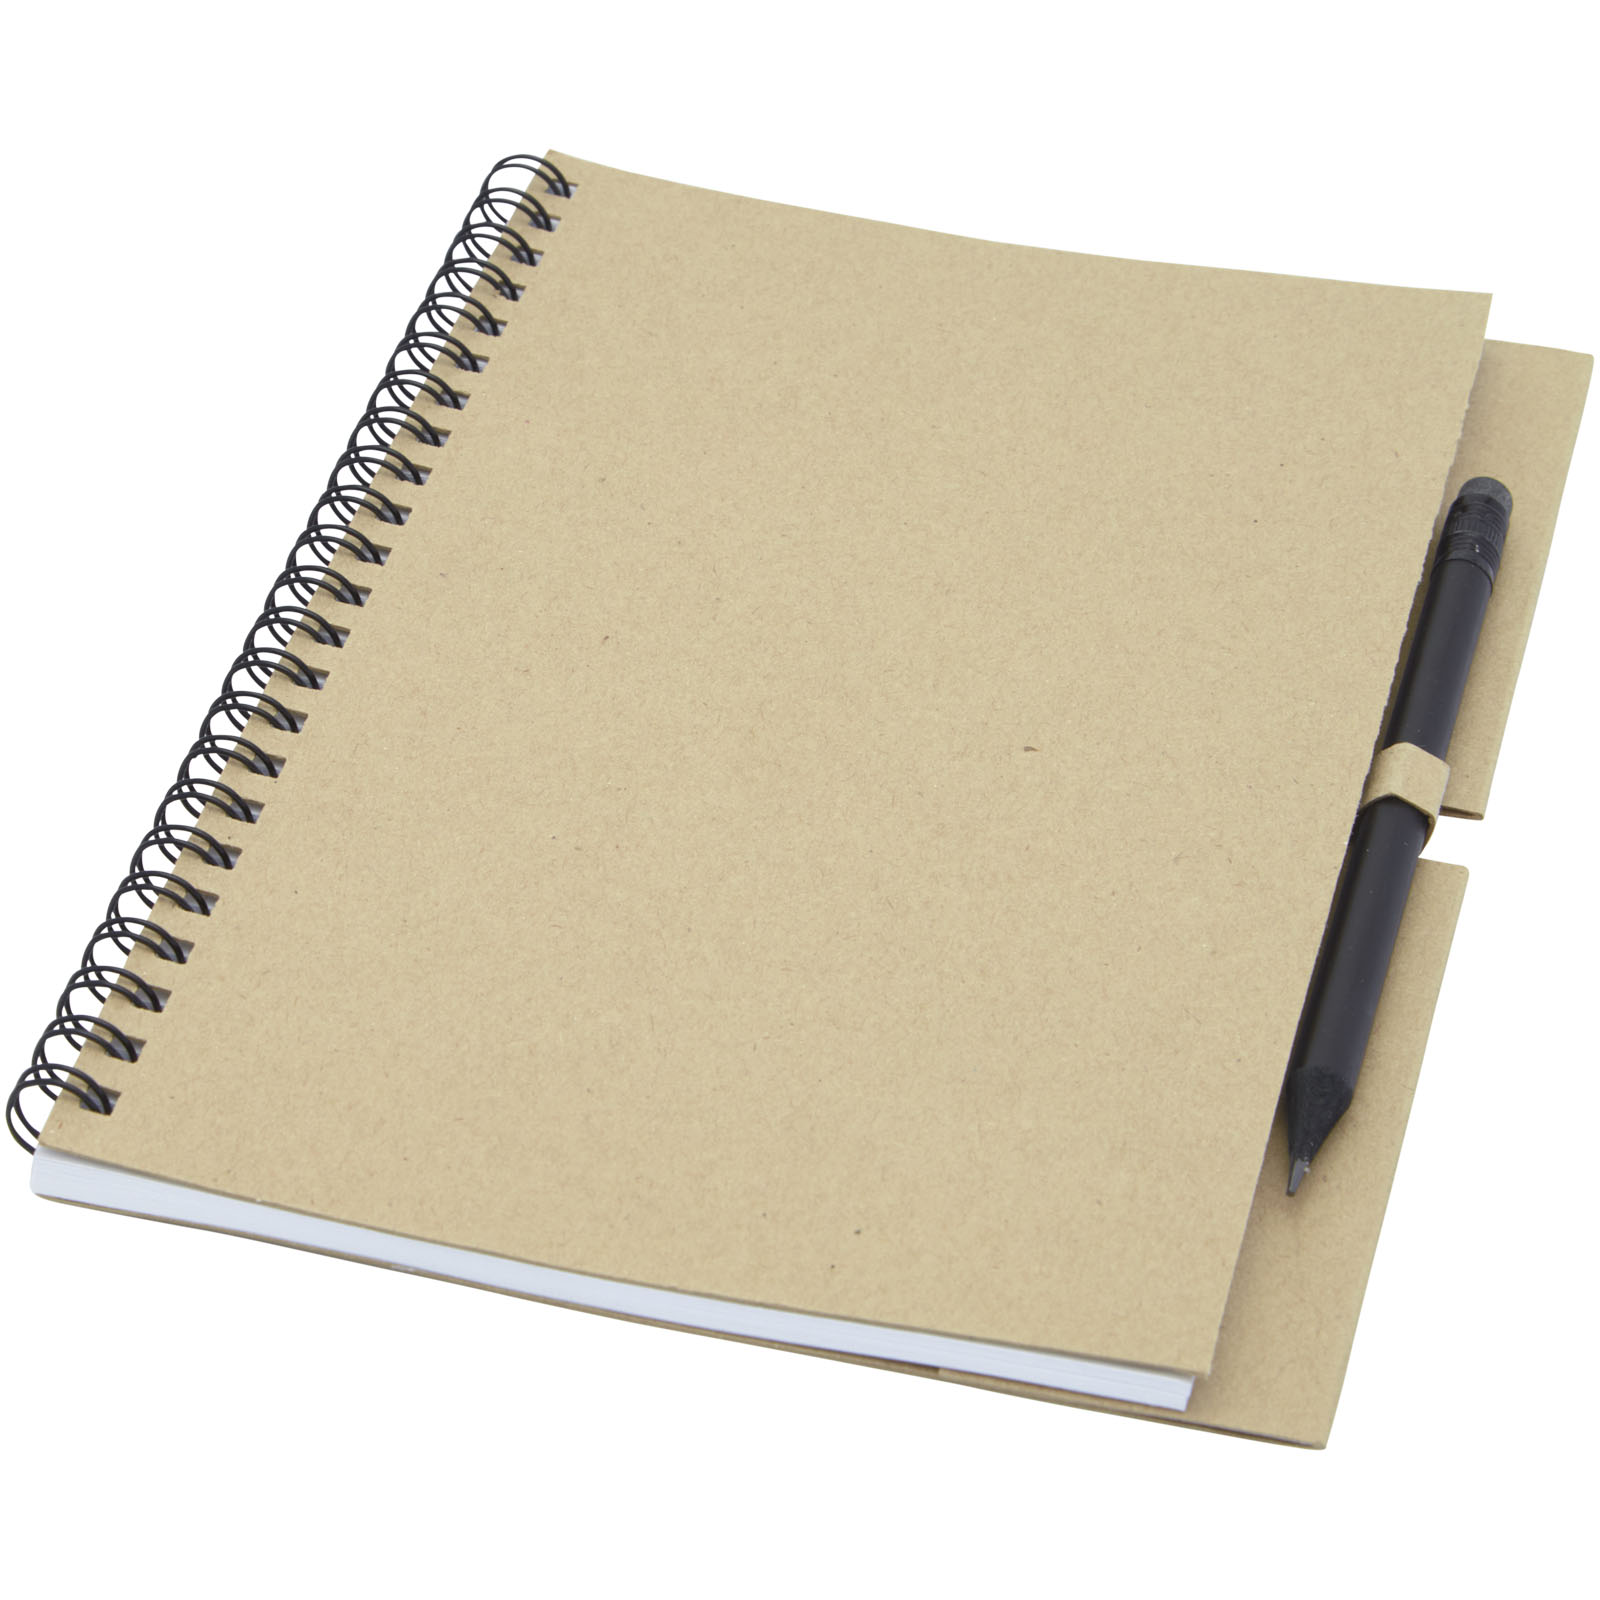 A notebook with a cover made from recycled paper, featuring a Wire-O binding with an included pencil. - Abbeyfield